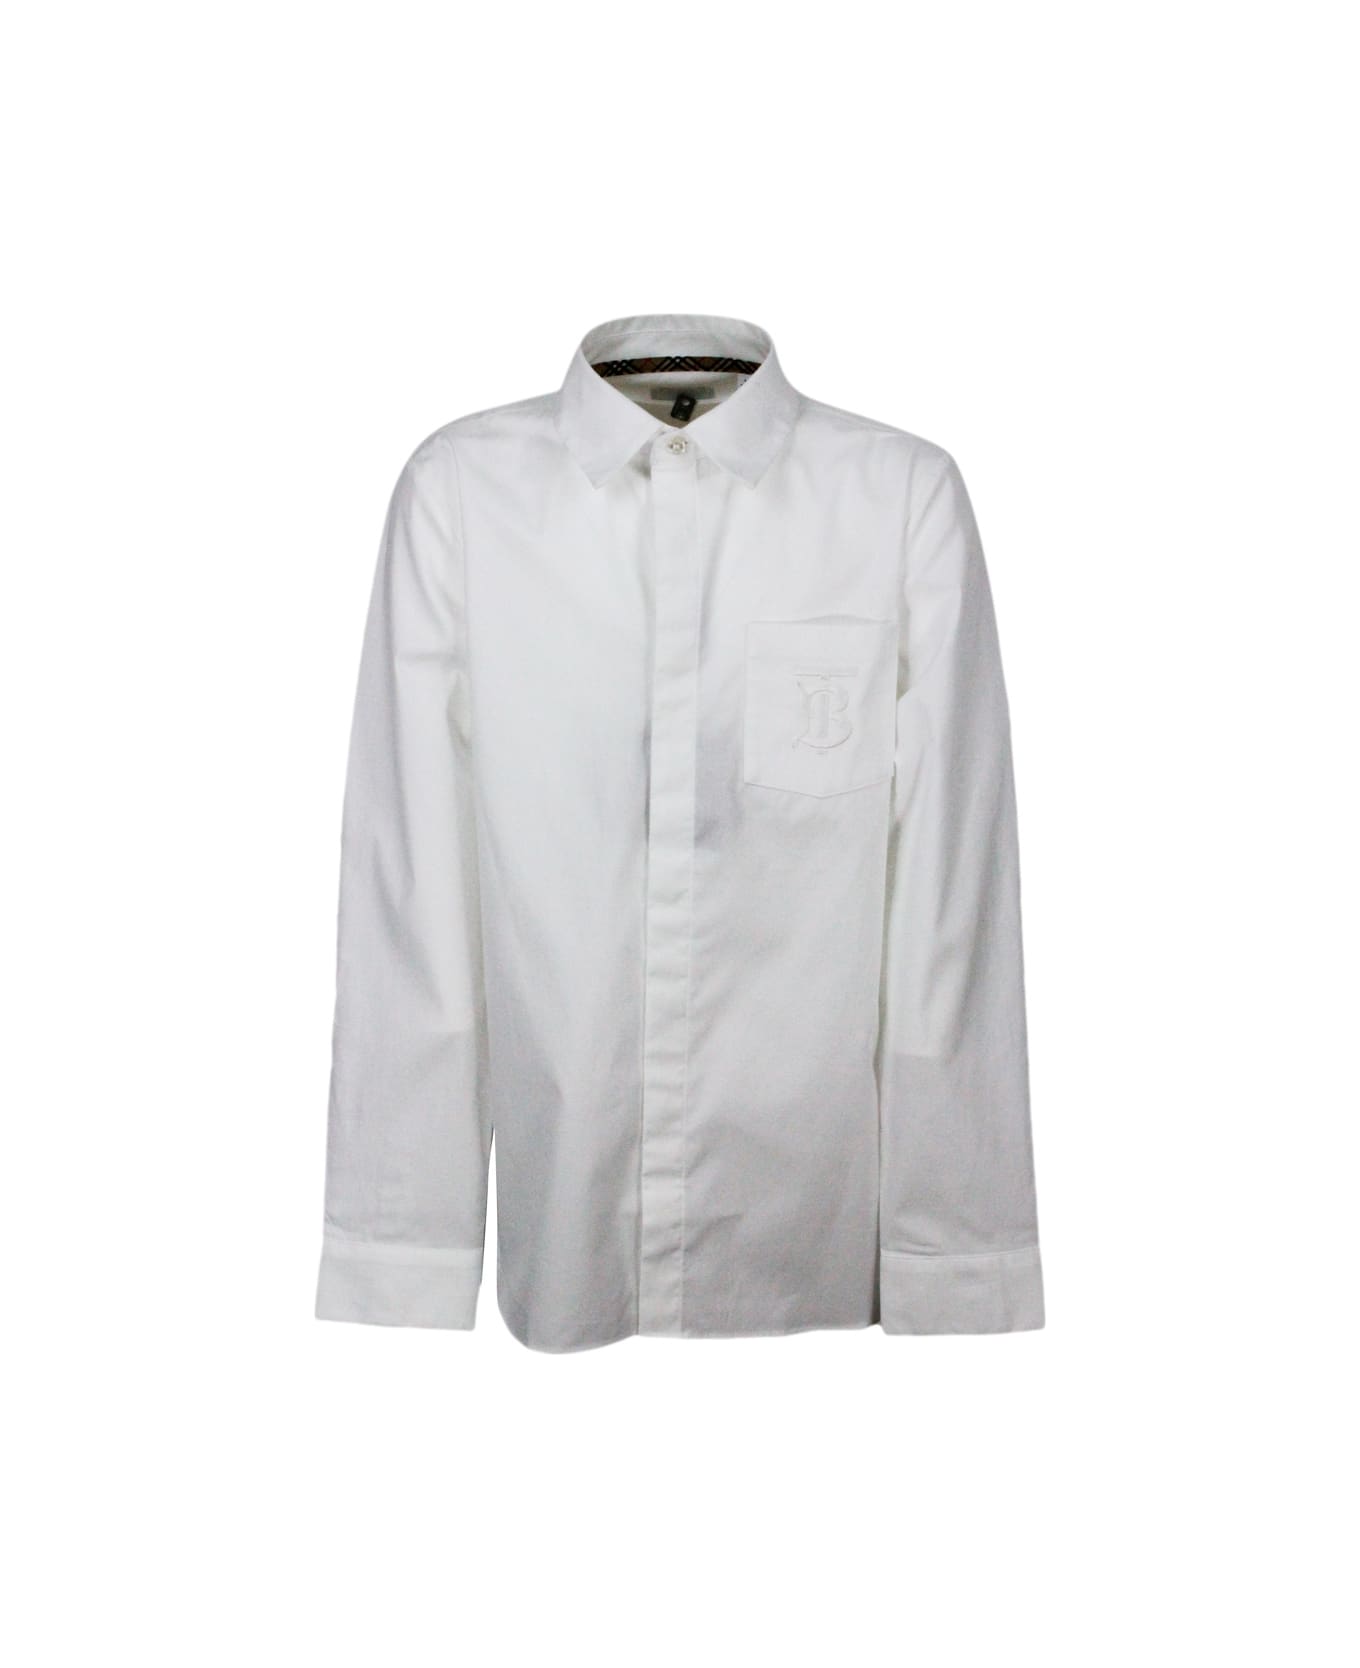 Burberry Long-sleeved Cotton Shirt - White